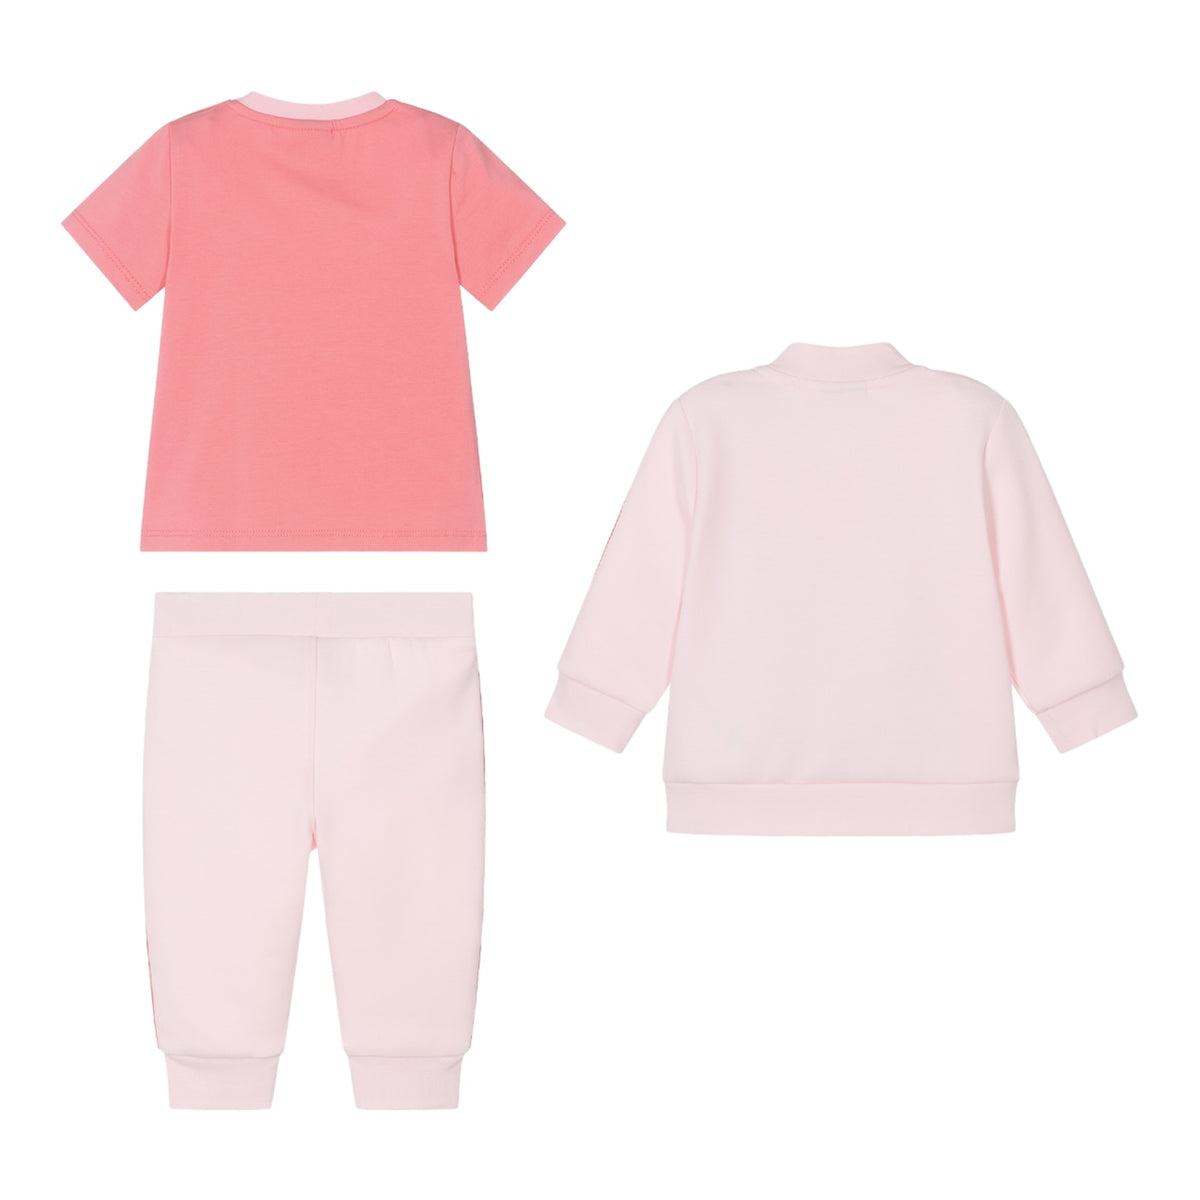 Hugo Boss Kids Toddler's 3PC T-Shirt and Tracksuit